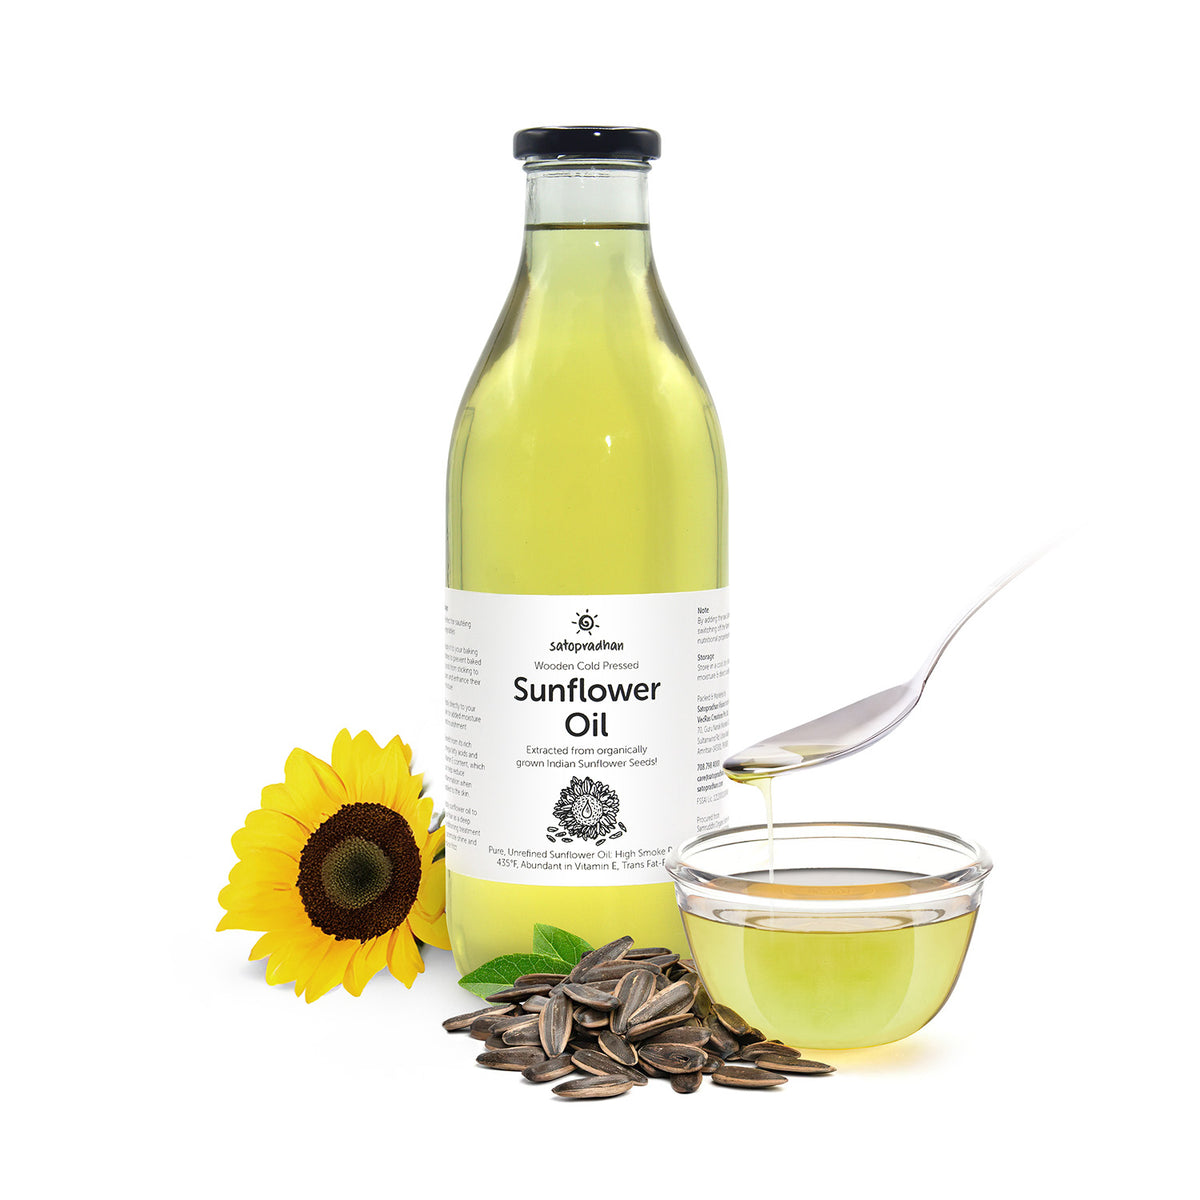 Organic Sunflower Oil 1000ml - Pure, Unrefined, Single-Filtered, Virgin & Wooden Cold-pressed (Kacchi Ghani) without Preservatives | Reusable Glass Bottle | High Oleic Acid |